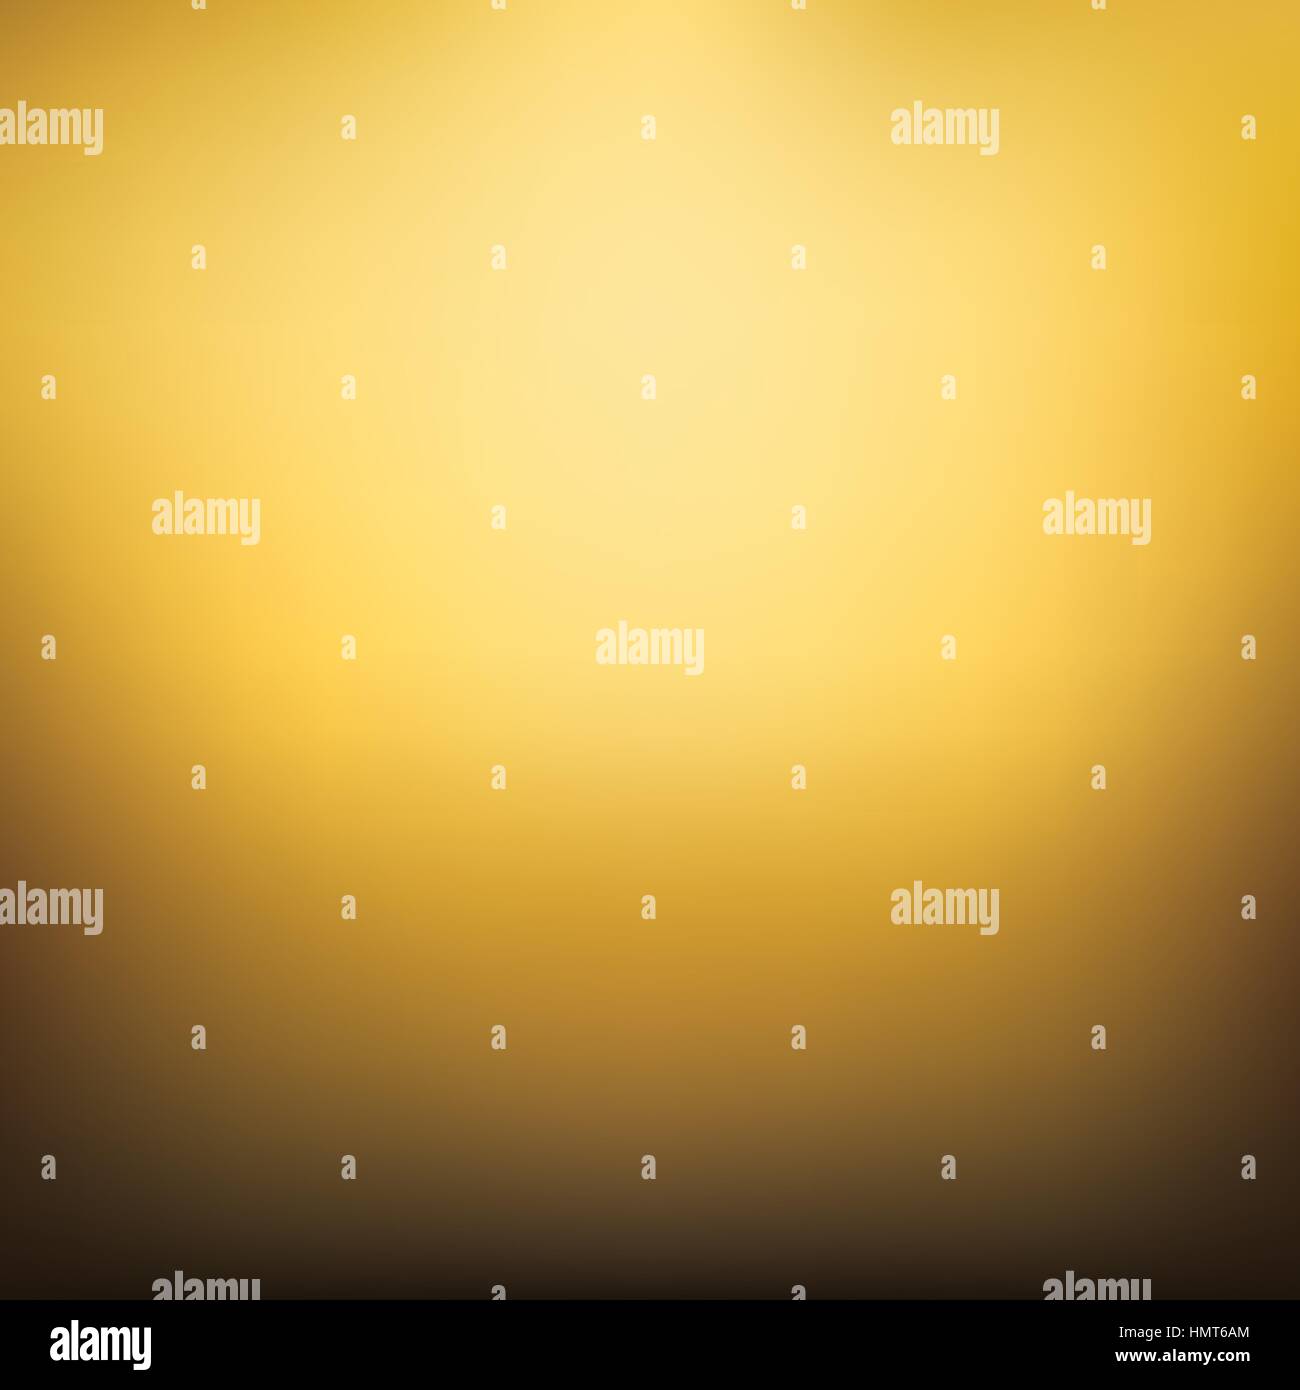 Gold gradient. Blurred golden colors mesh background. Smooth blend banner template. Easy editable soft colored eps8 vector illustration without transp Stock Vector